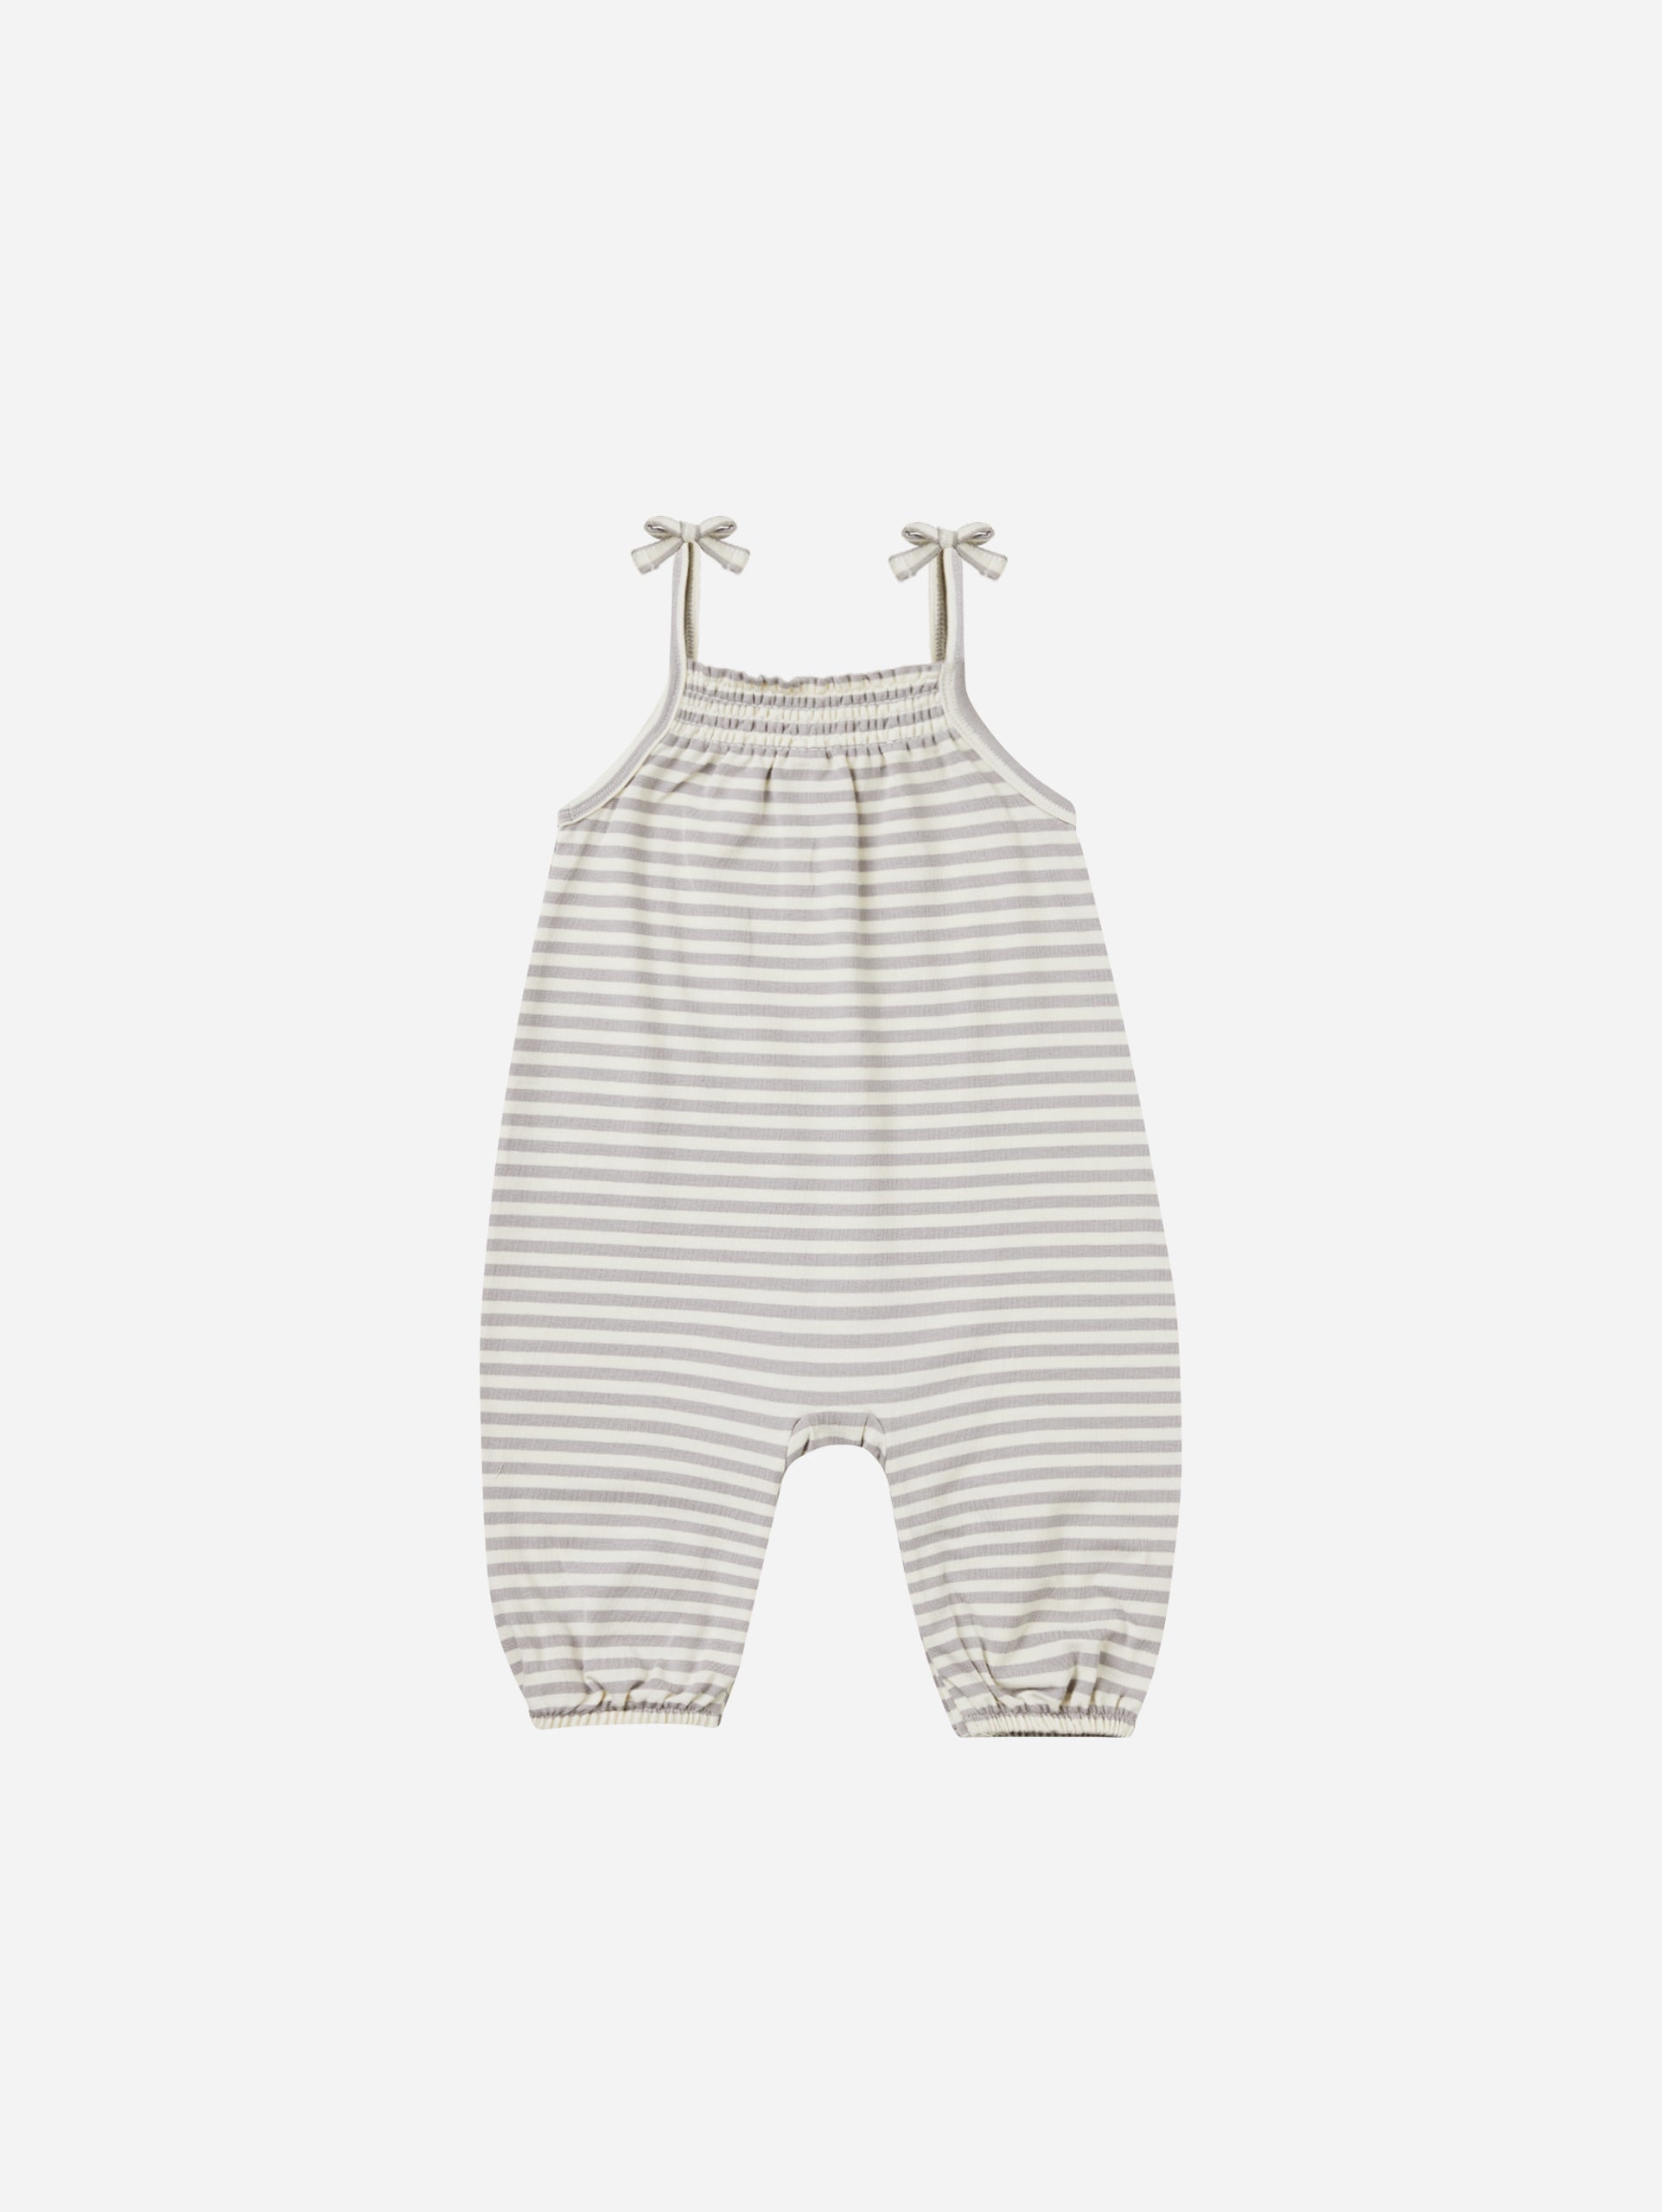 Smocked Jumpsuit || Periwinkle Stripe - Rylee + Cru | Kids Clothes | Trendy Baby Clothes | Modern Infant Outfits |